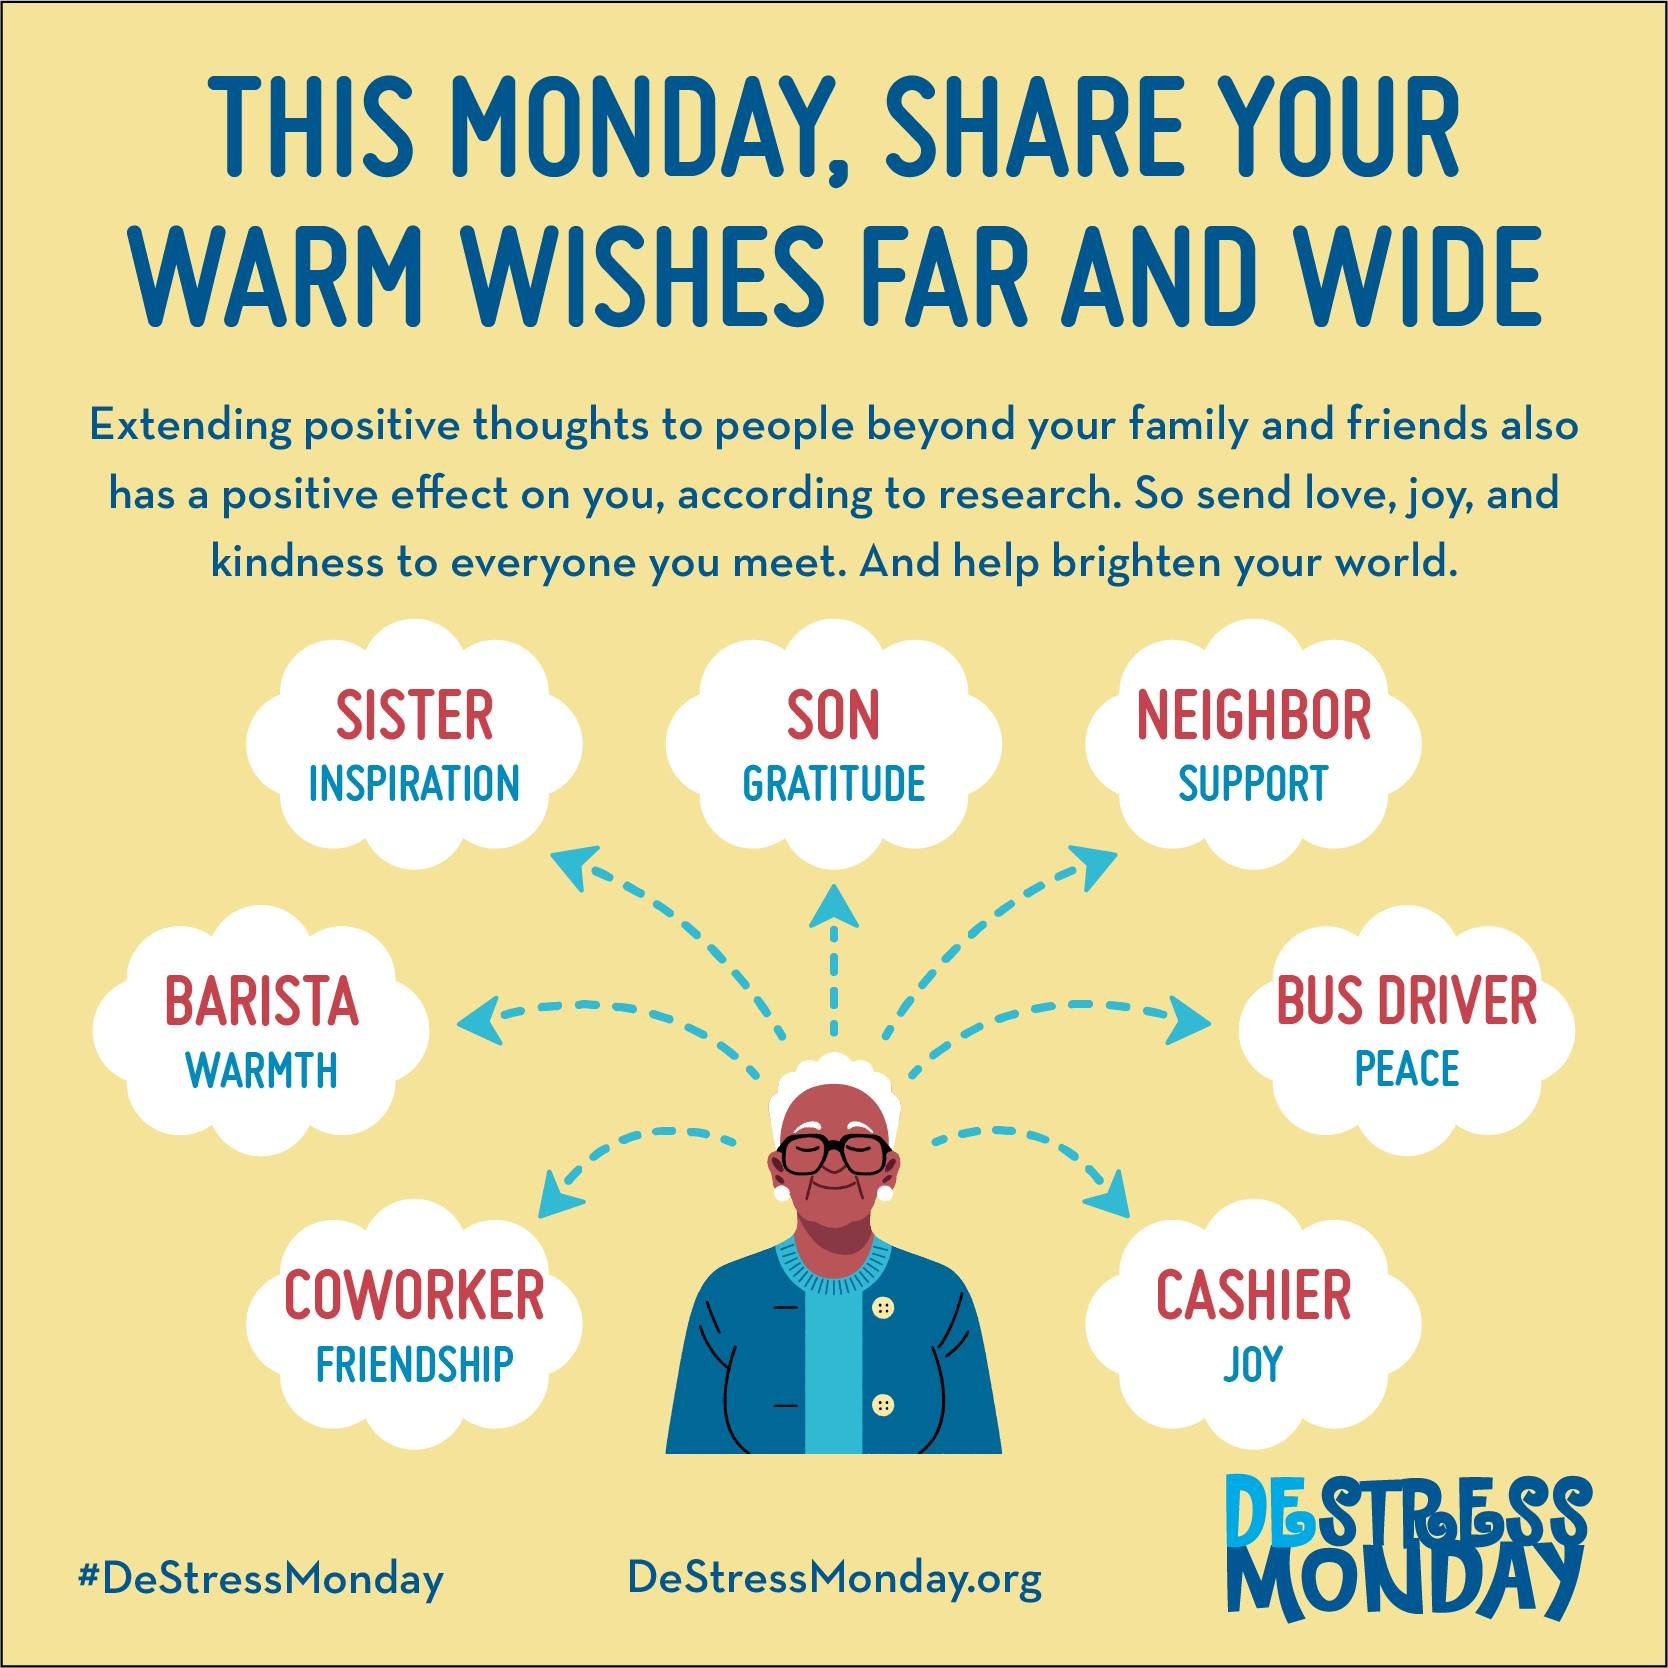 ❤ A small act of kindness, a compliment, or a sign of appreciation can transform someone&rsquo;s outlook immediately.

Check out how you can spread more positivity at mondaycampaigns.org/destress-monday/spread-positivity-beyond-your-immediate-social-